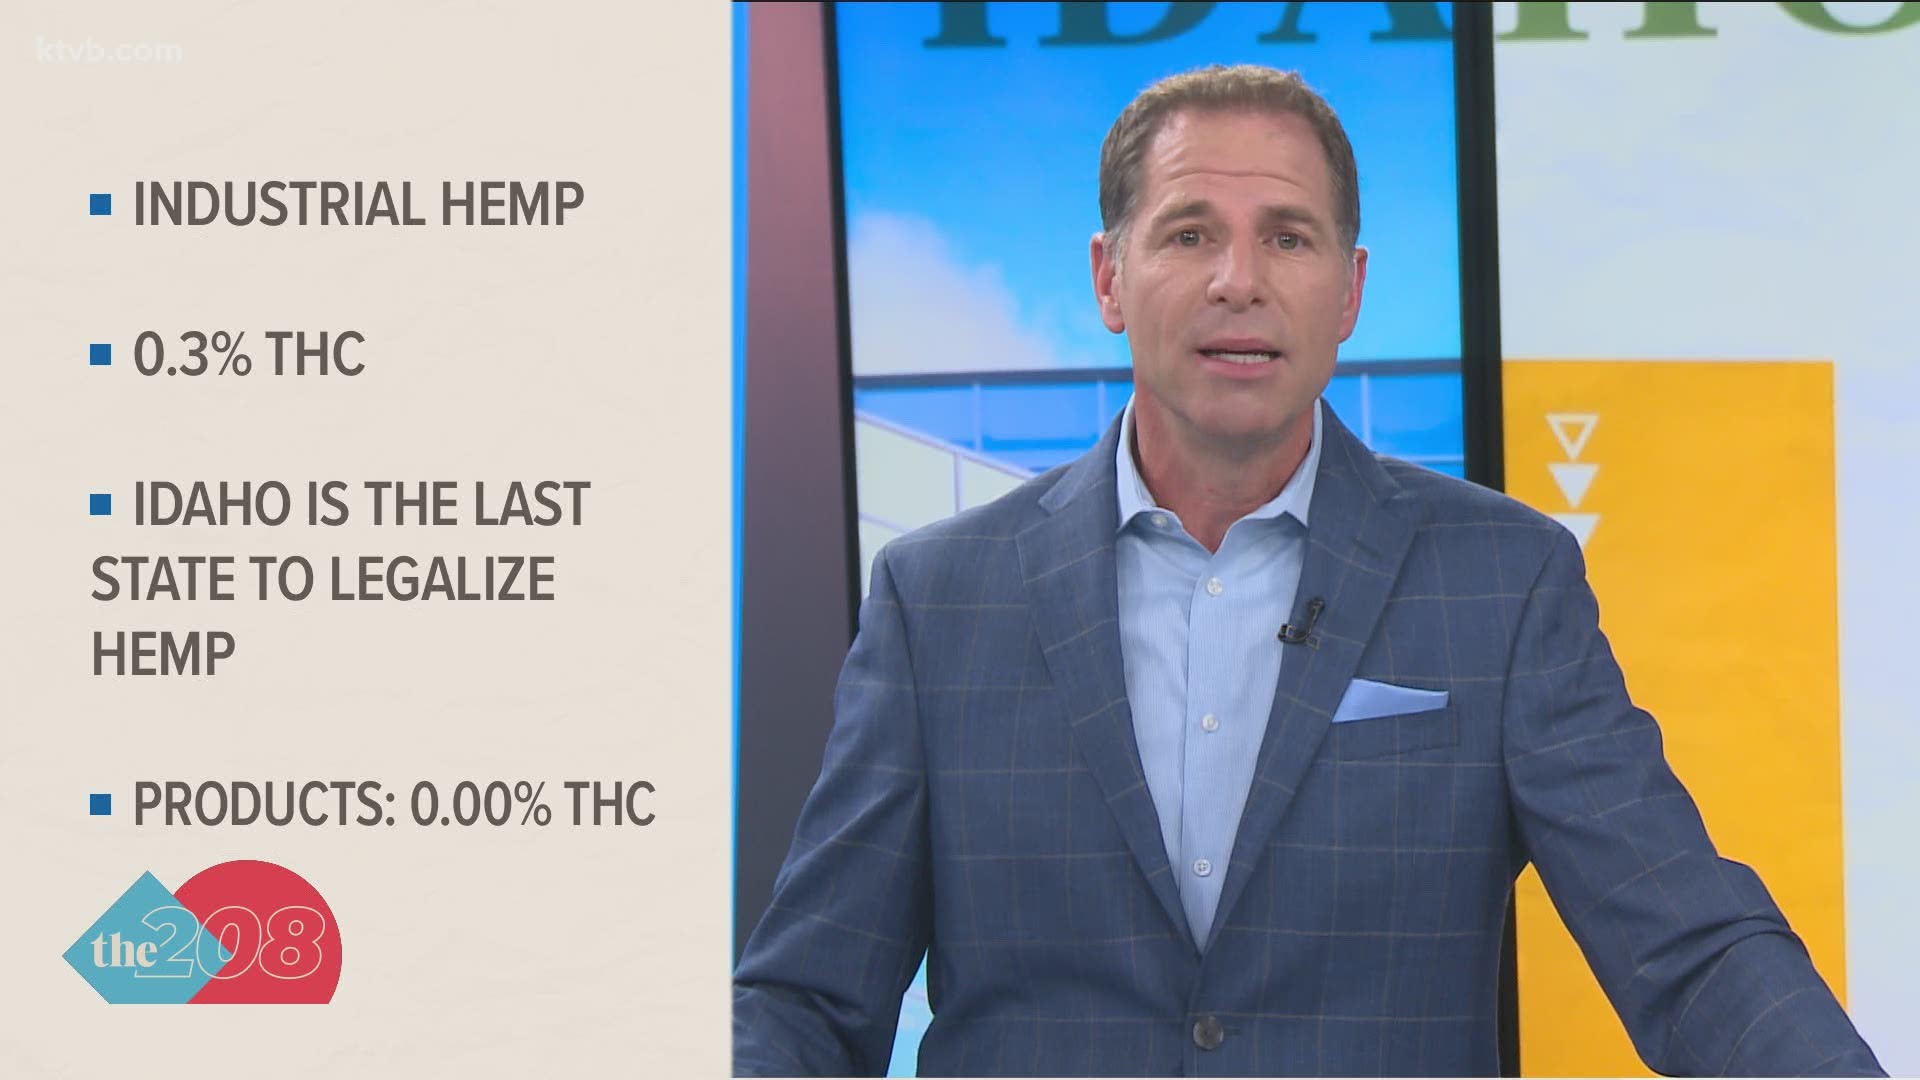 The new law does not allow selling to Idaho consumers hemp products containing any amount of THC.